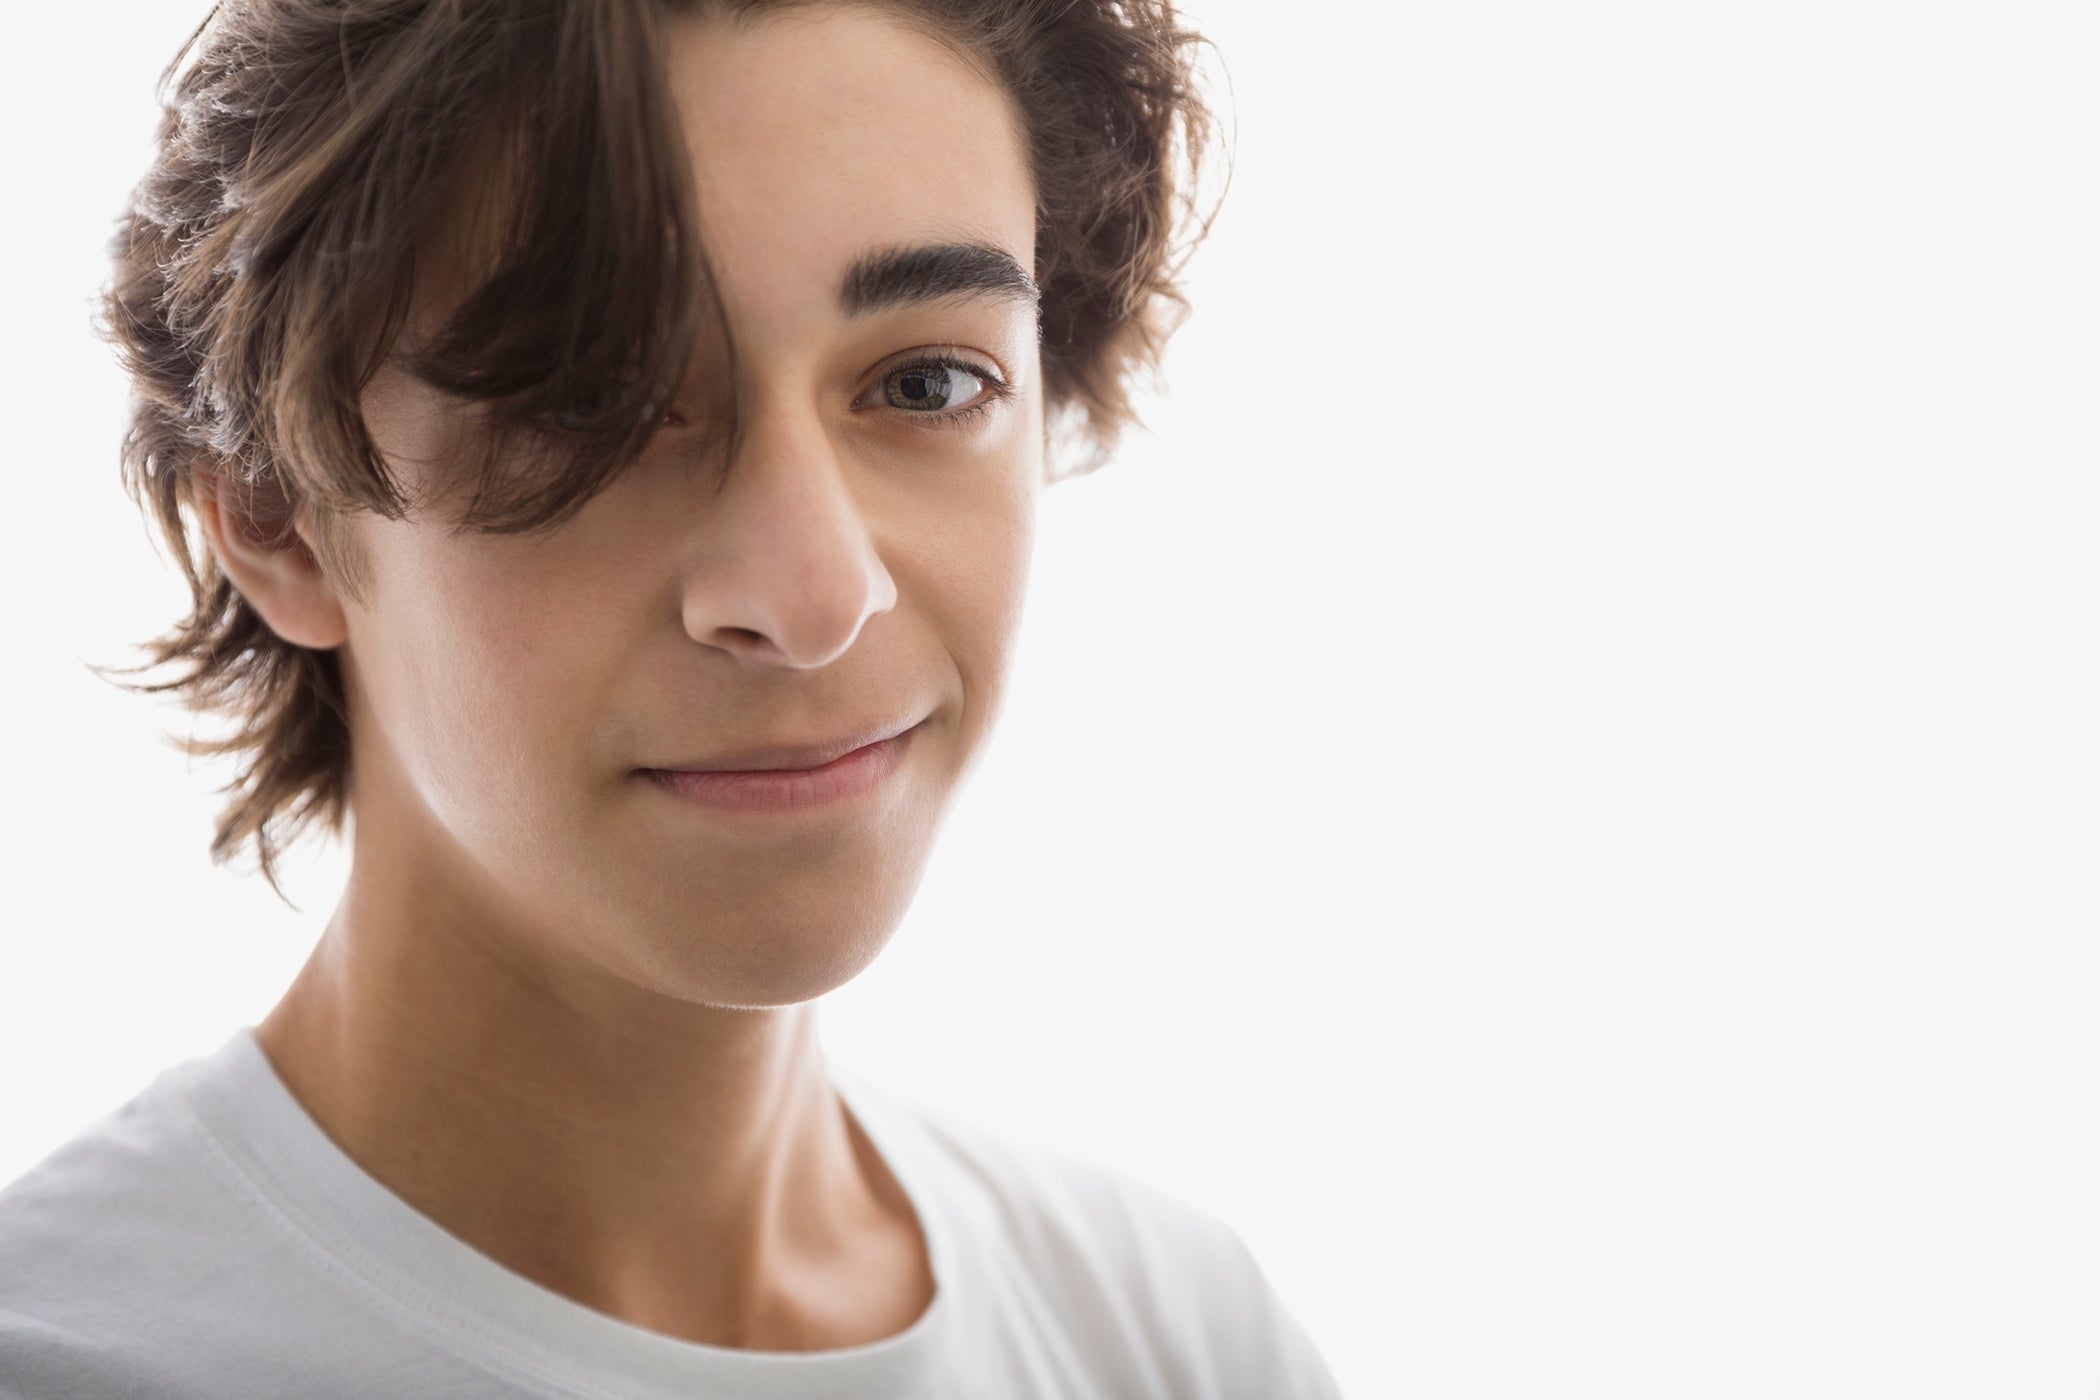 Tips for Parents with Acne-Prone Teens